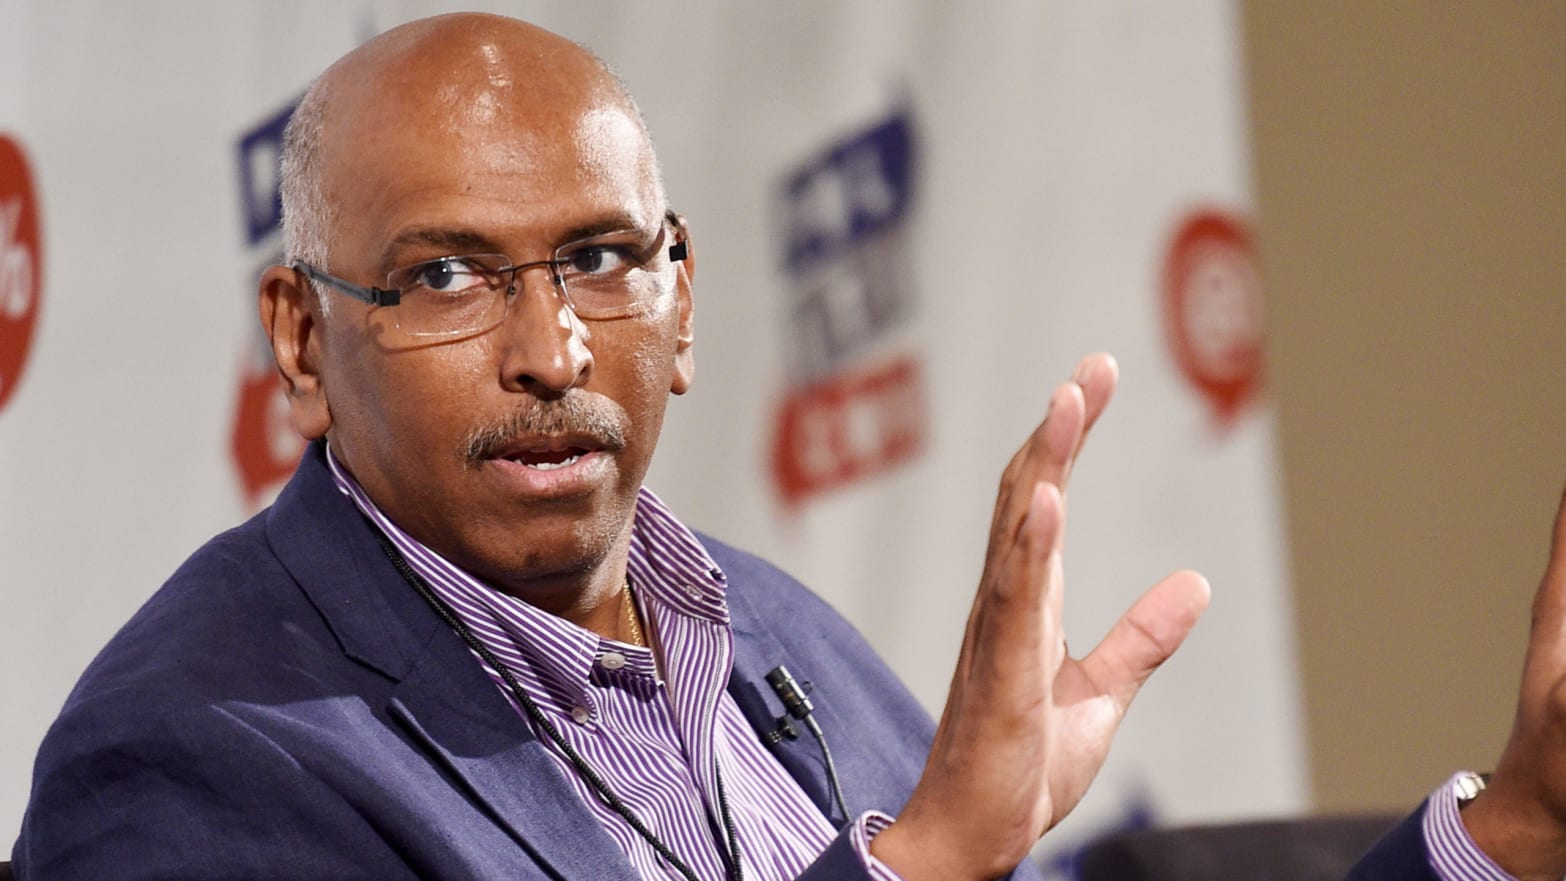 Michael Steele S Treatment At Cpac Is A Sad And Worrisome Omen For The Gop